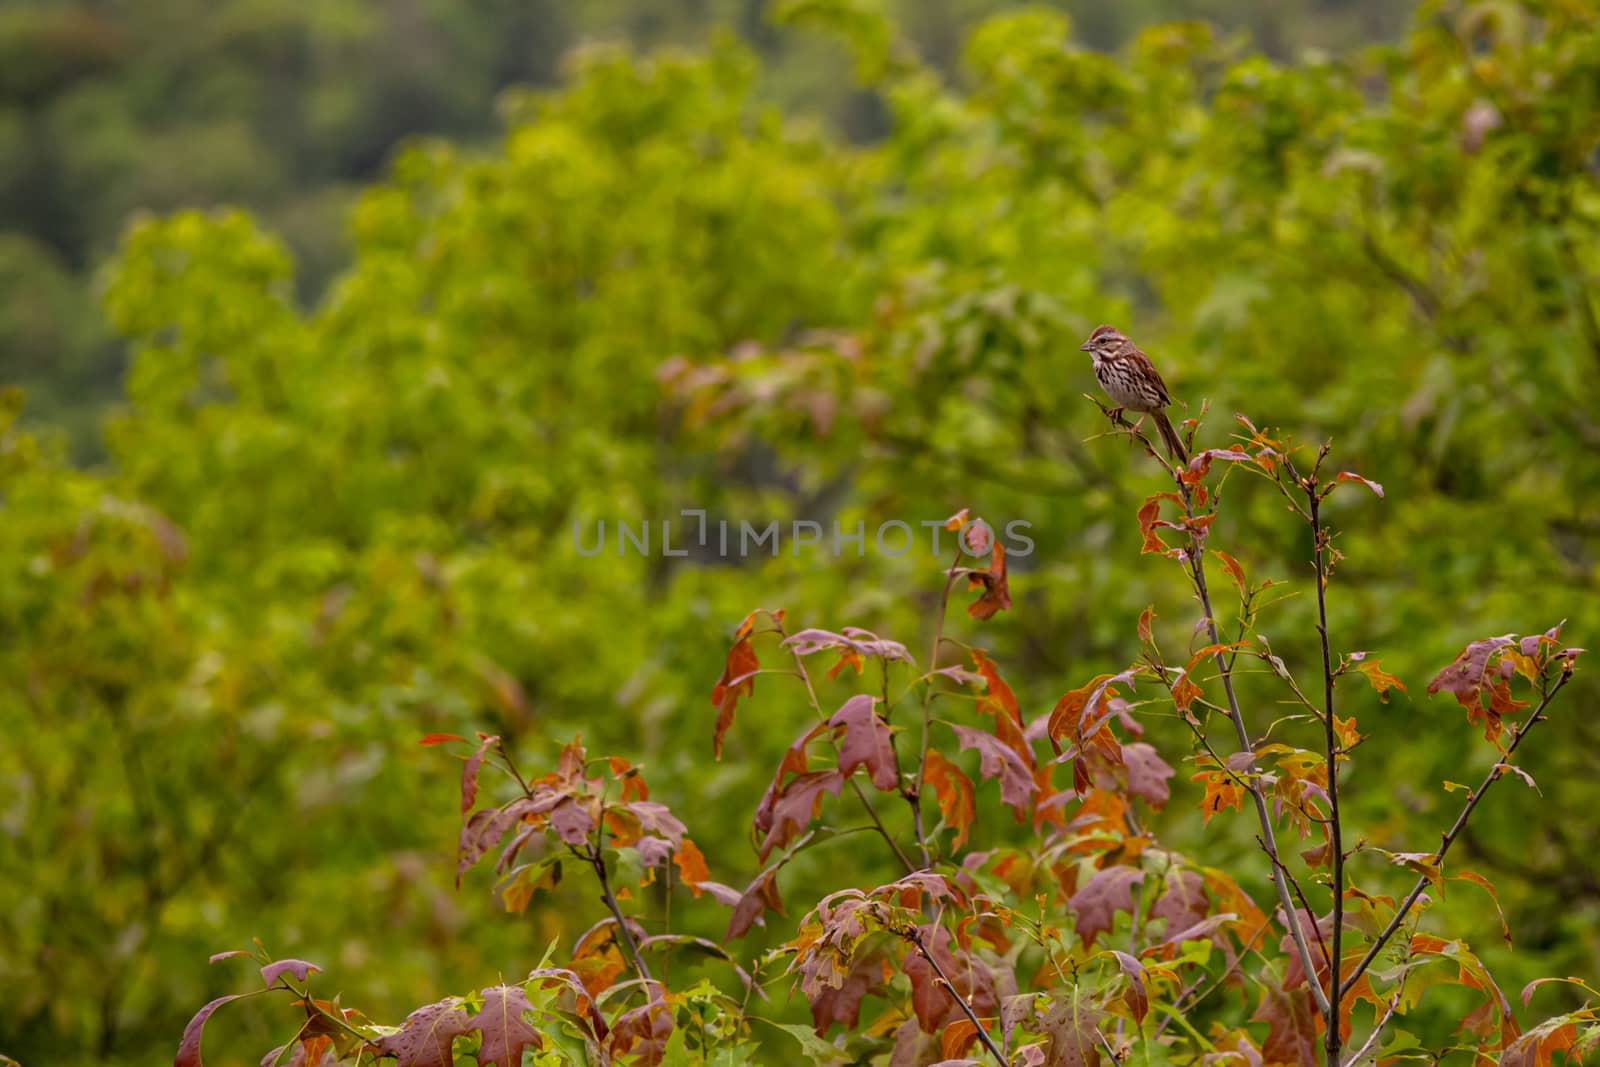 A song sparrow rests on top of the narrow branch of a tree with red leaves and blurred green foliage behind it.